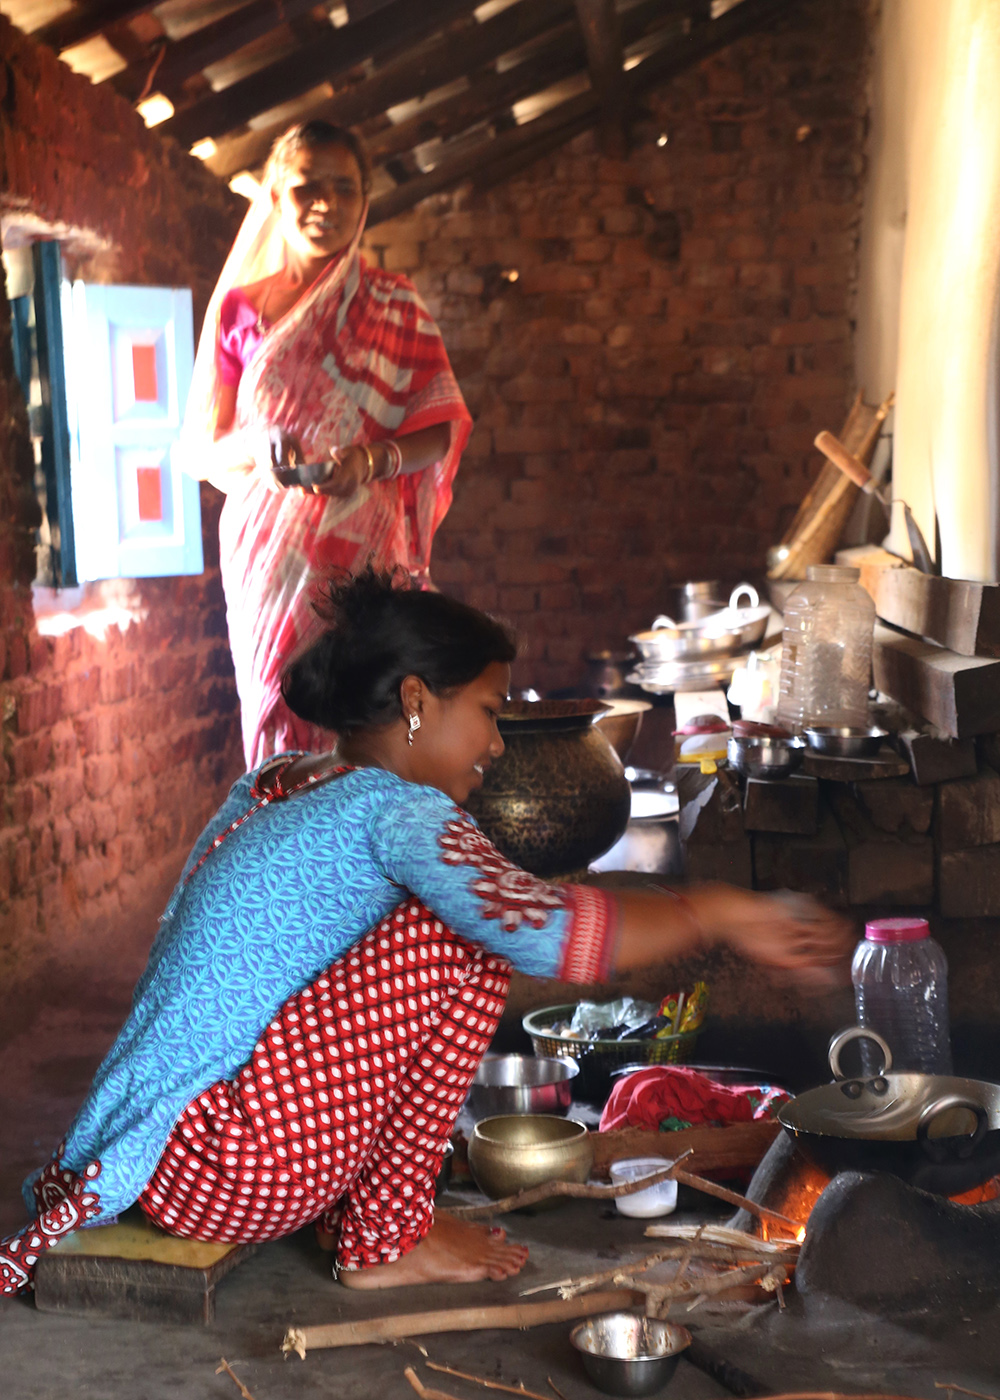 The mother’s sister prepares a midafternoon meal for the young child. Photo credit: Peggy Koniz-Booher